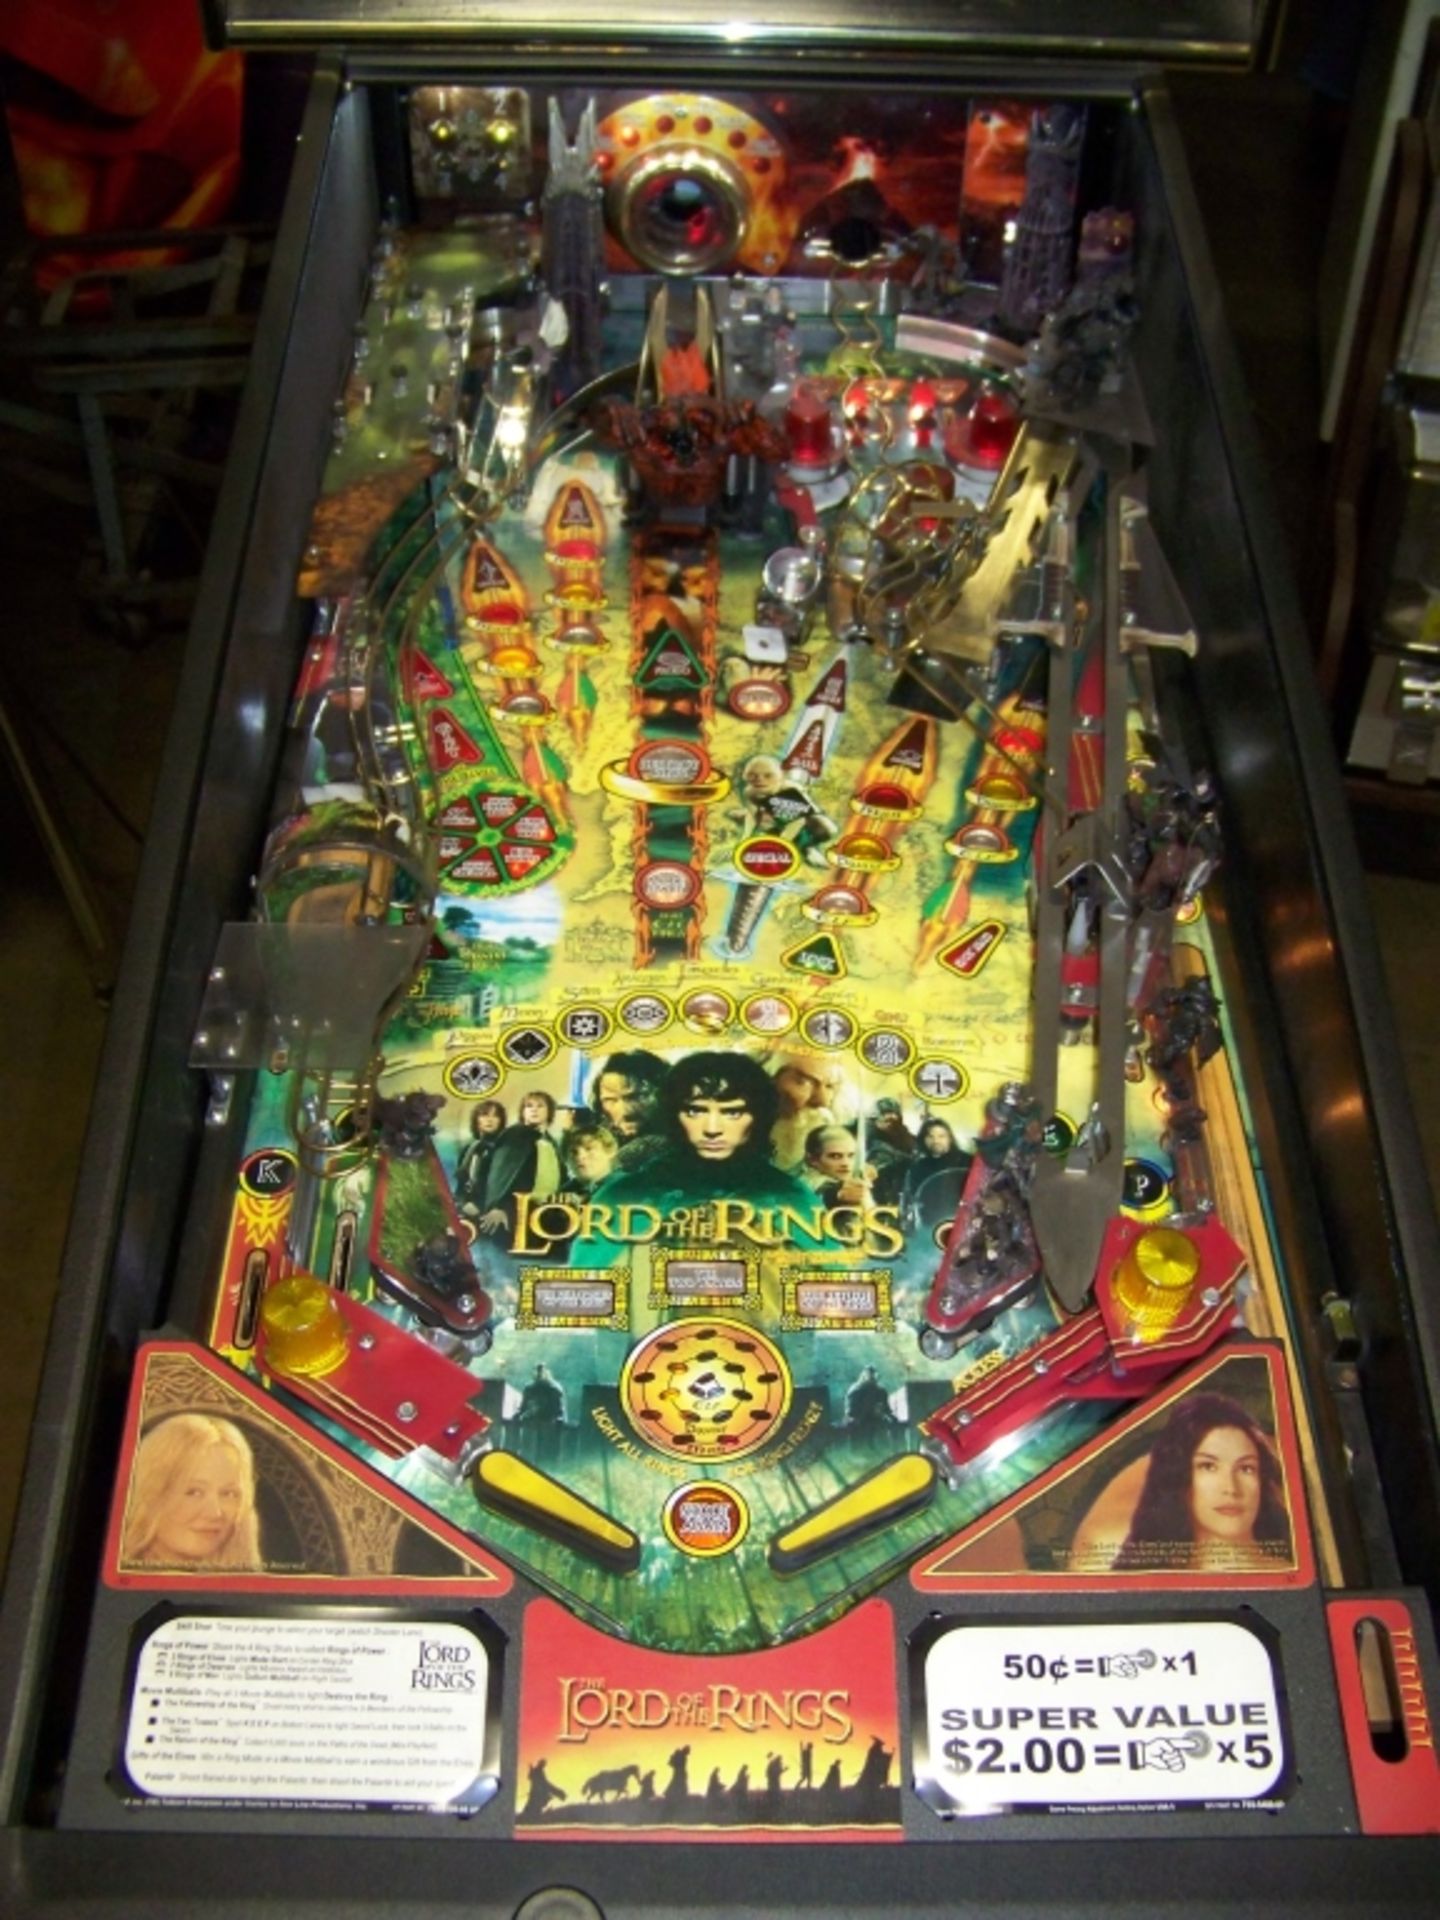 LORD OF THE RINGS PINBALL MACHINE STERN Item is in used condition. Evidence of wear and commercial - Image 7 of 10